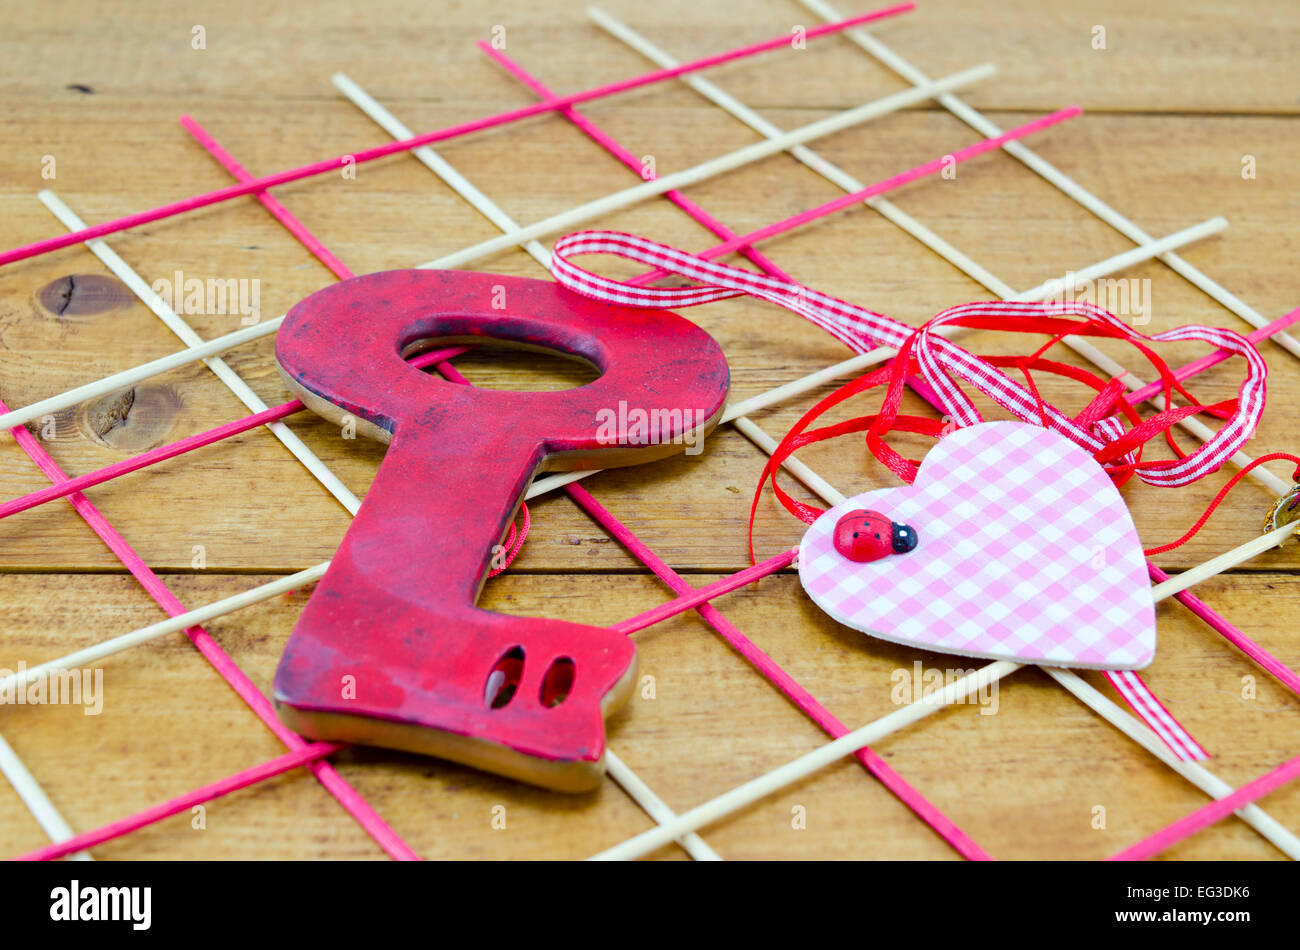 Romantic arrangement for Valentines including a red key and a heart on a decorated wooden table Stock Photo